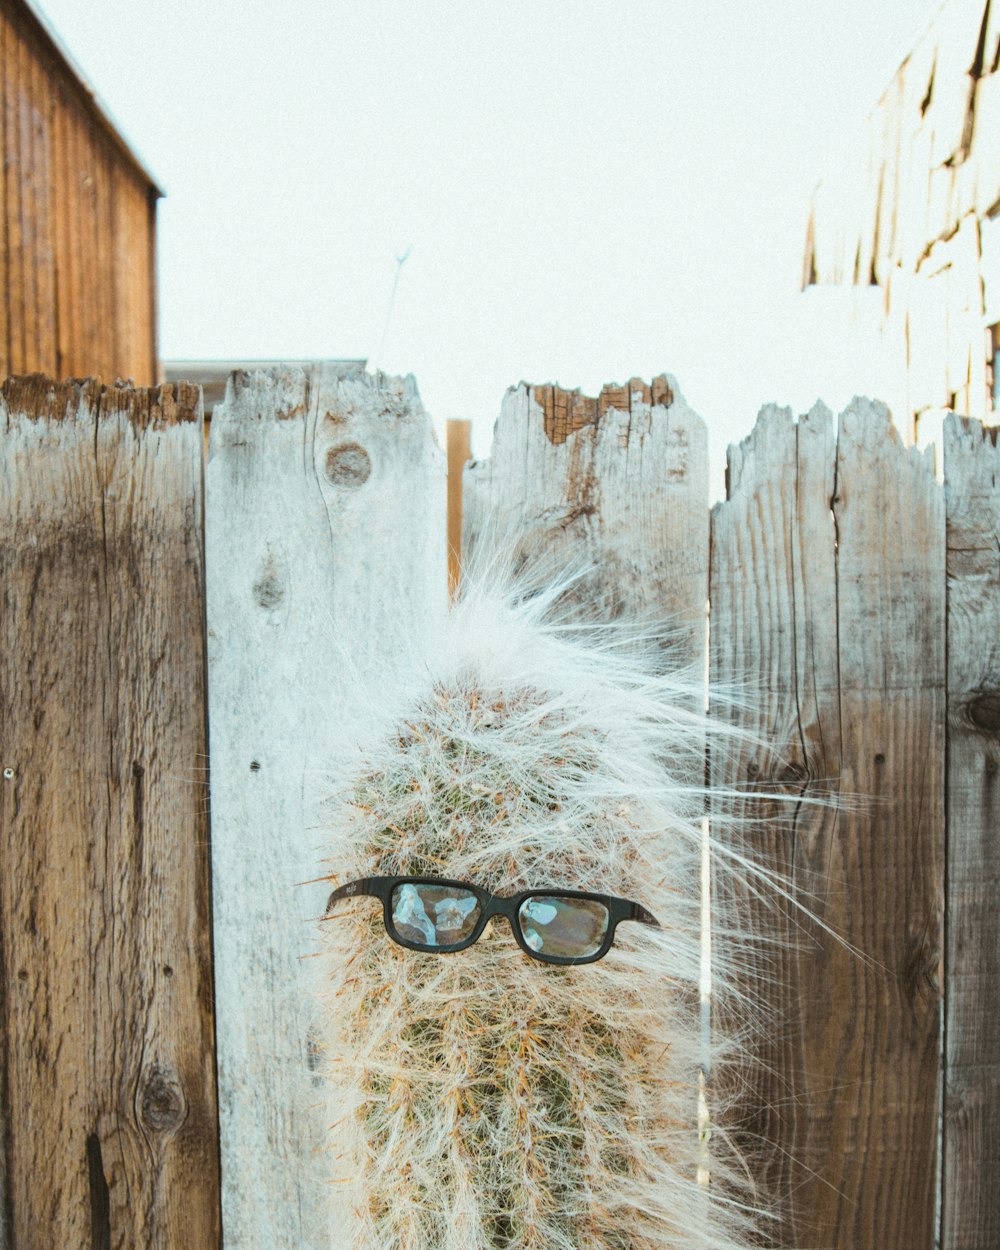 a cactus wearing glasses is standing in front of a wooden fence